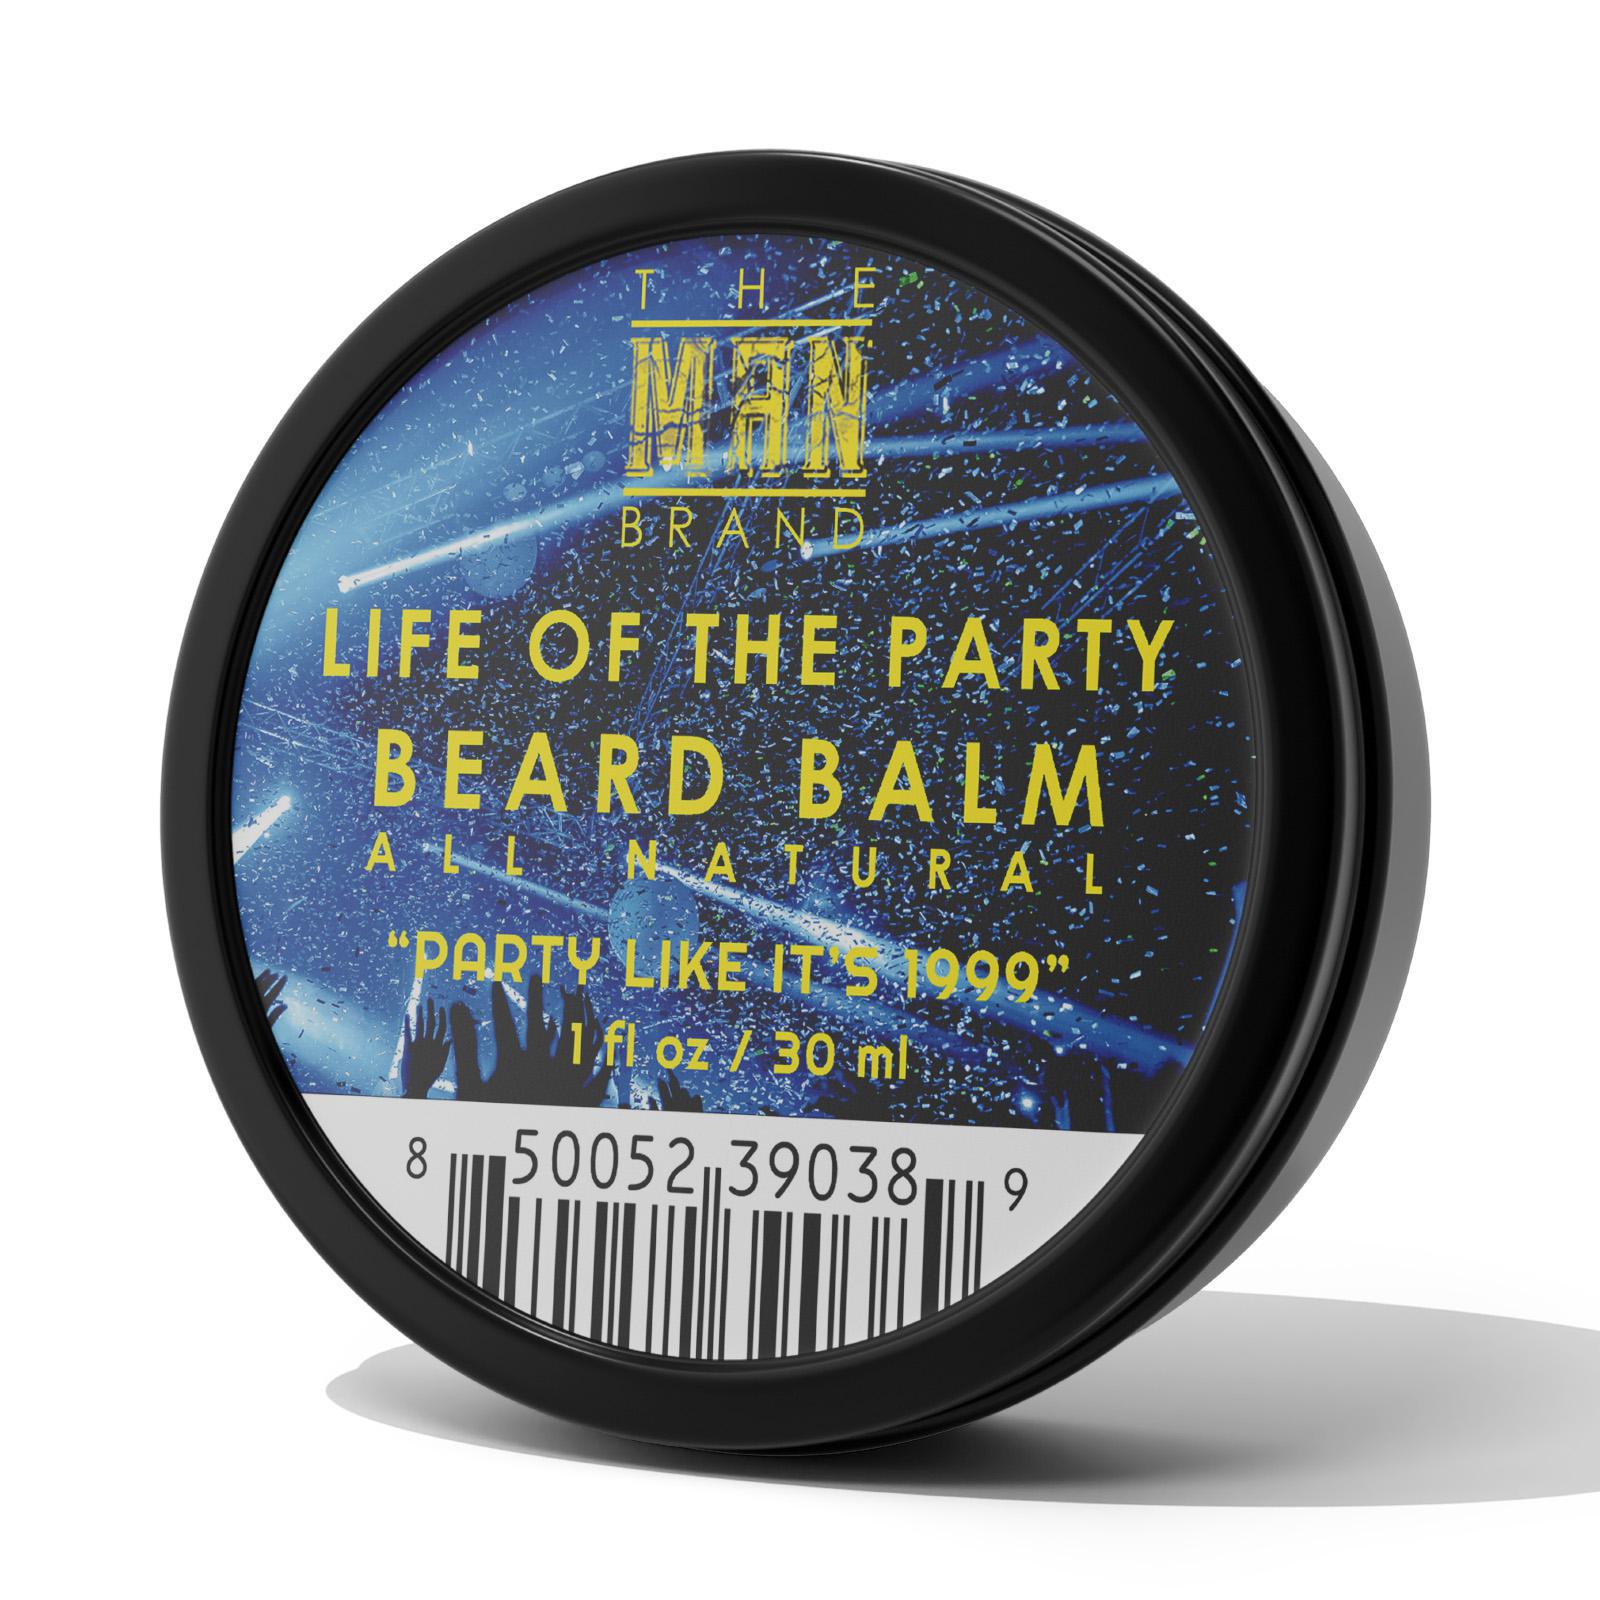 The Man Brand’s Beard Balm for Men - Natural Beeswax Based Conditioning Balm for Beard Care - Scented Beard Balm for Styling in a Round Screw Top Tin